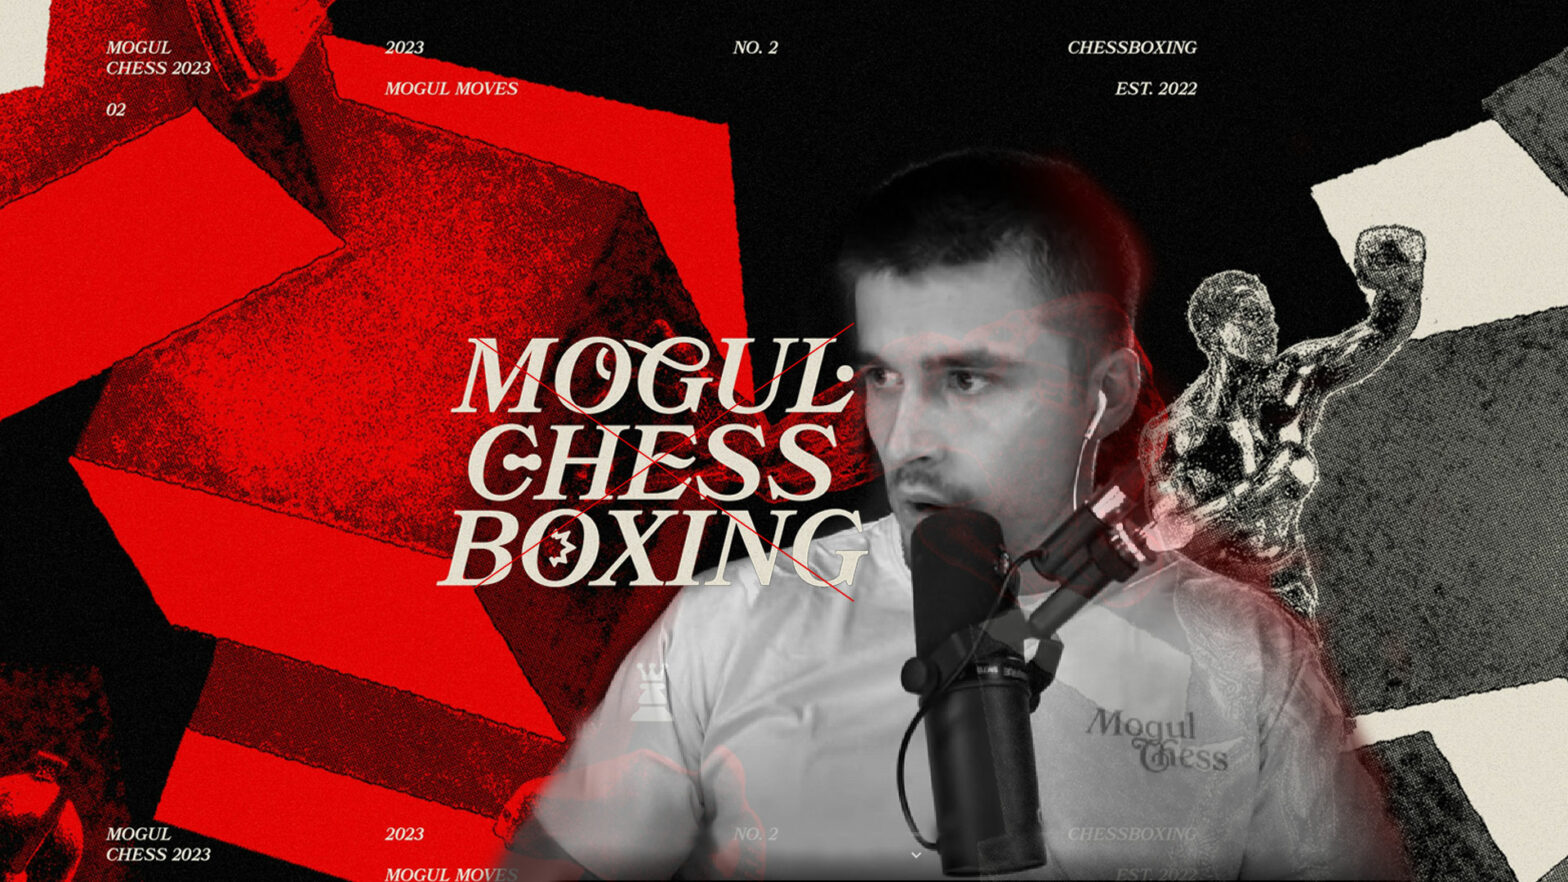 LUDWIG MOGUL CHESSBOXING FULL CARD RESULTS 